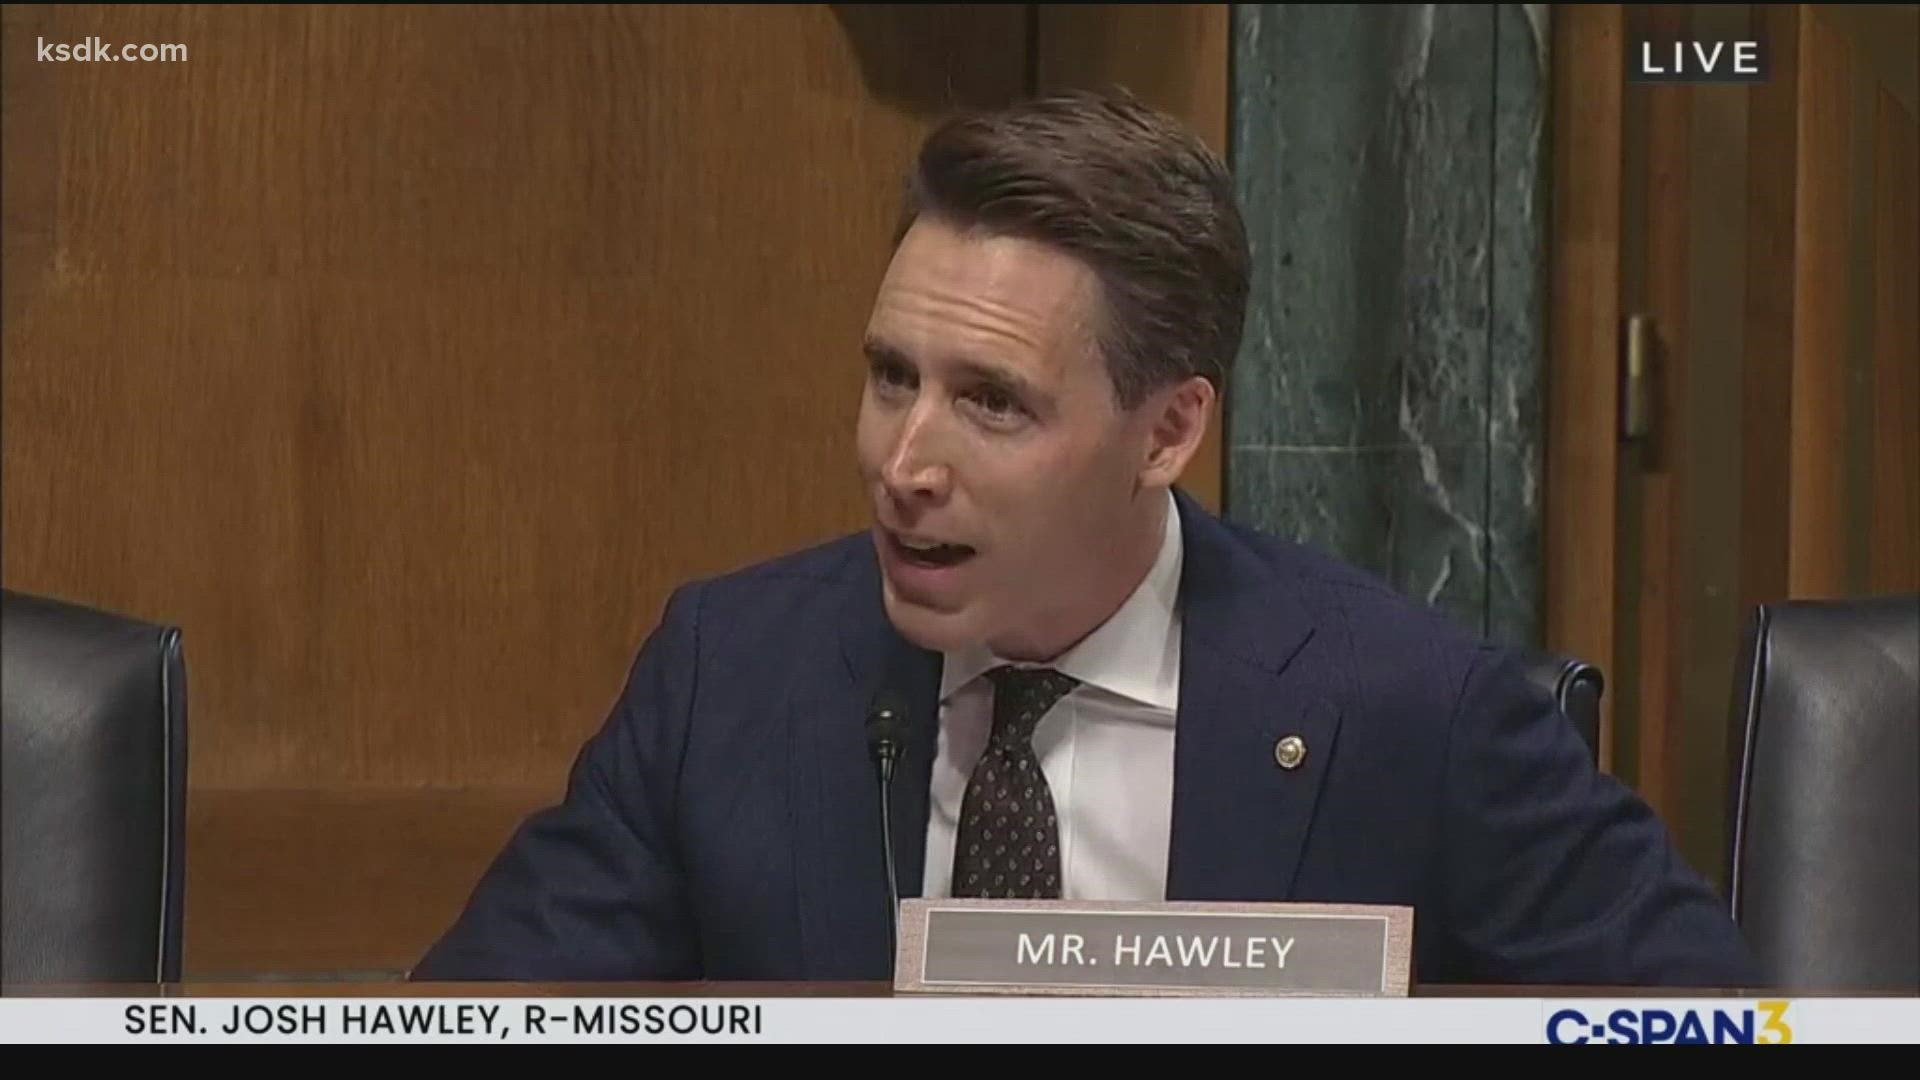 Senator Hawley's outrage started earlier this week when the DOJ announced a new partnership with local law enforcement to investigate threats toward school board